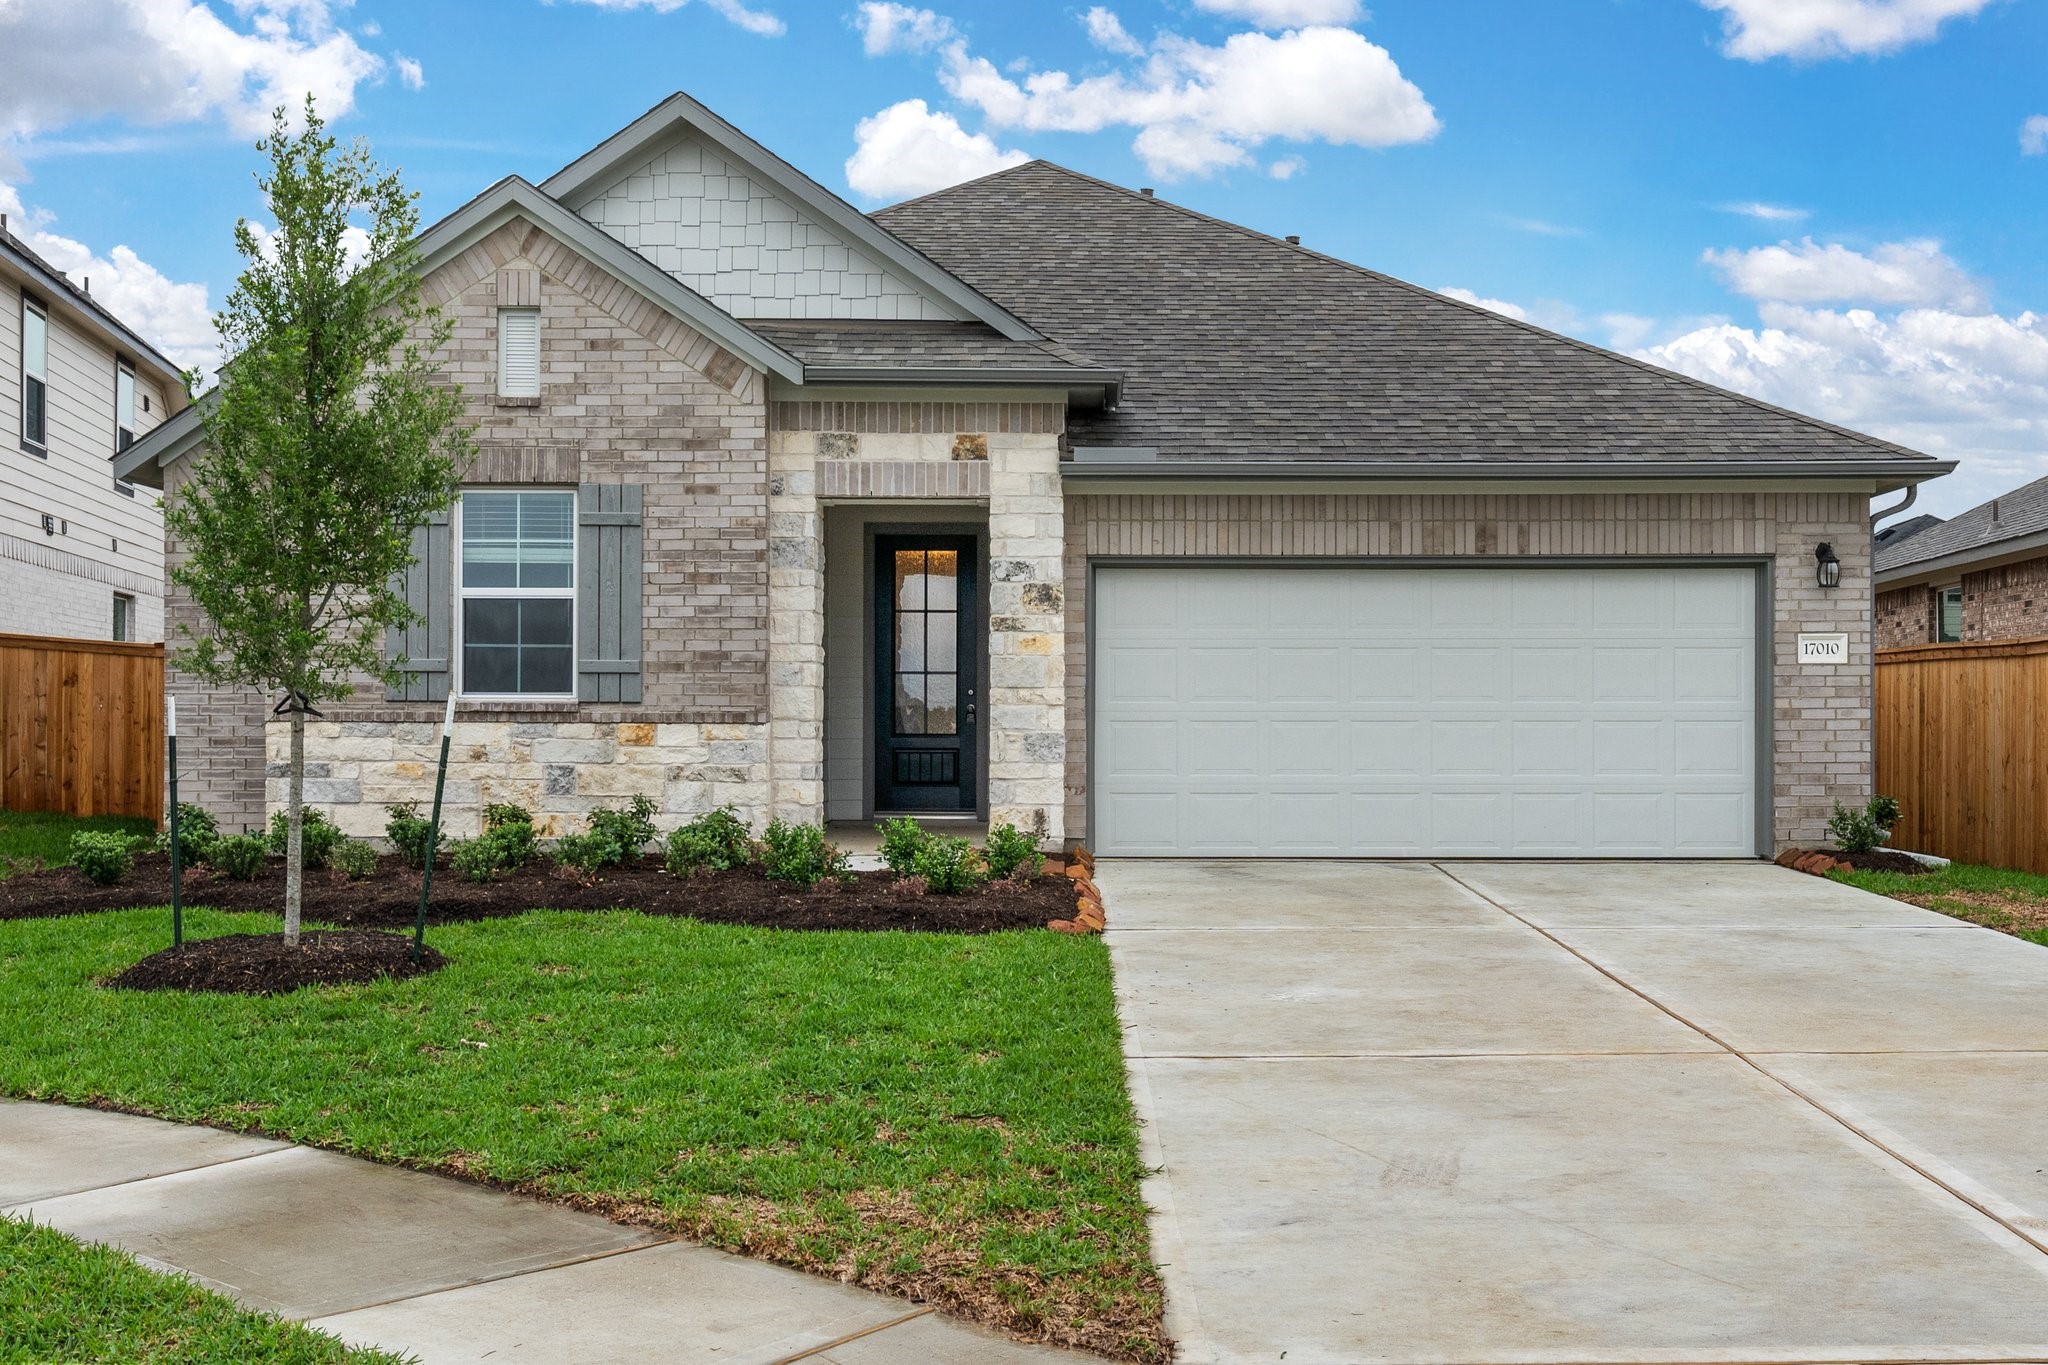 Welcome home to 17101 Garden Moor Trail located in the community of Dellrose and zoned to Waller ISD.